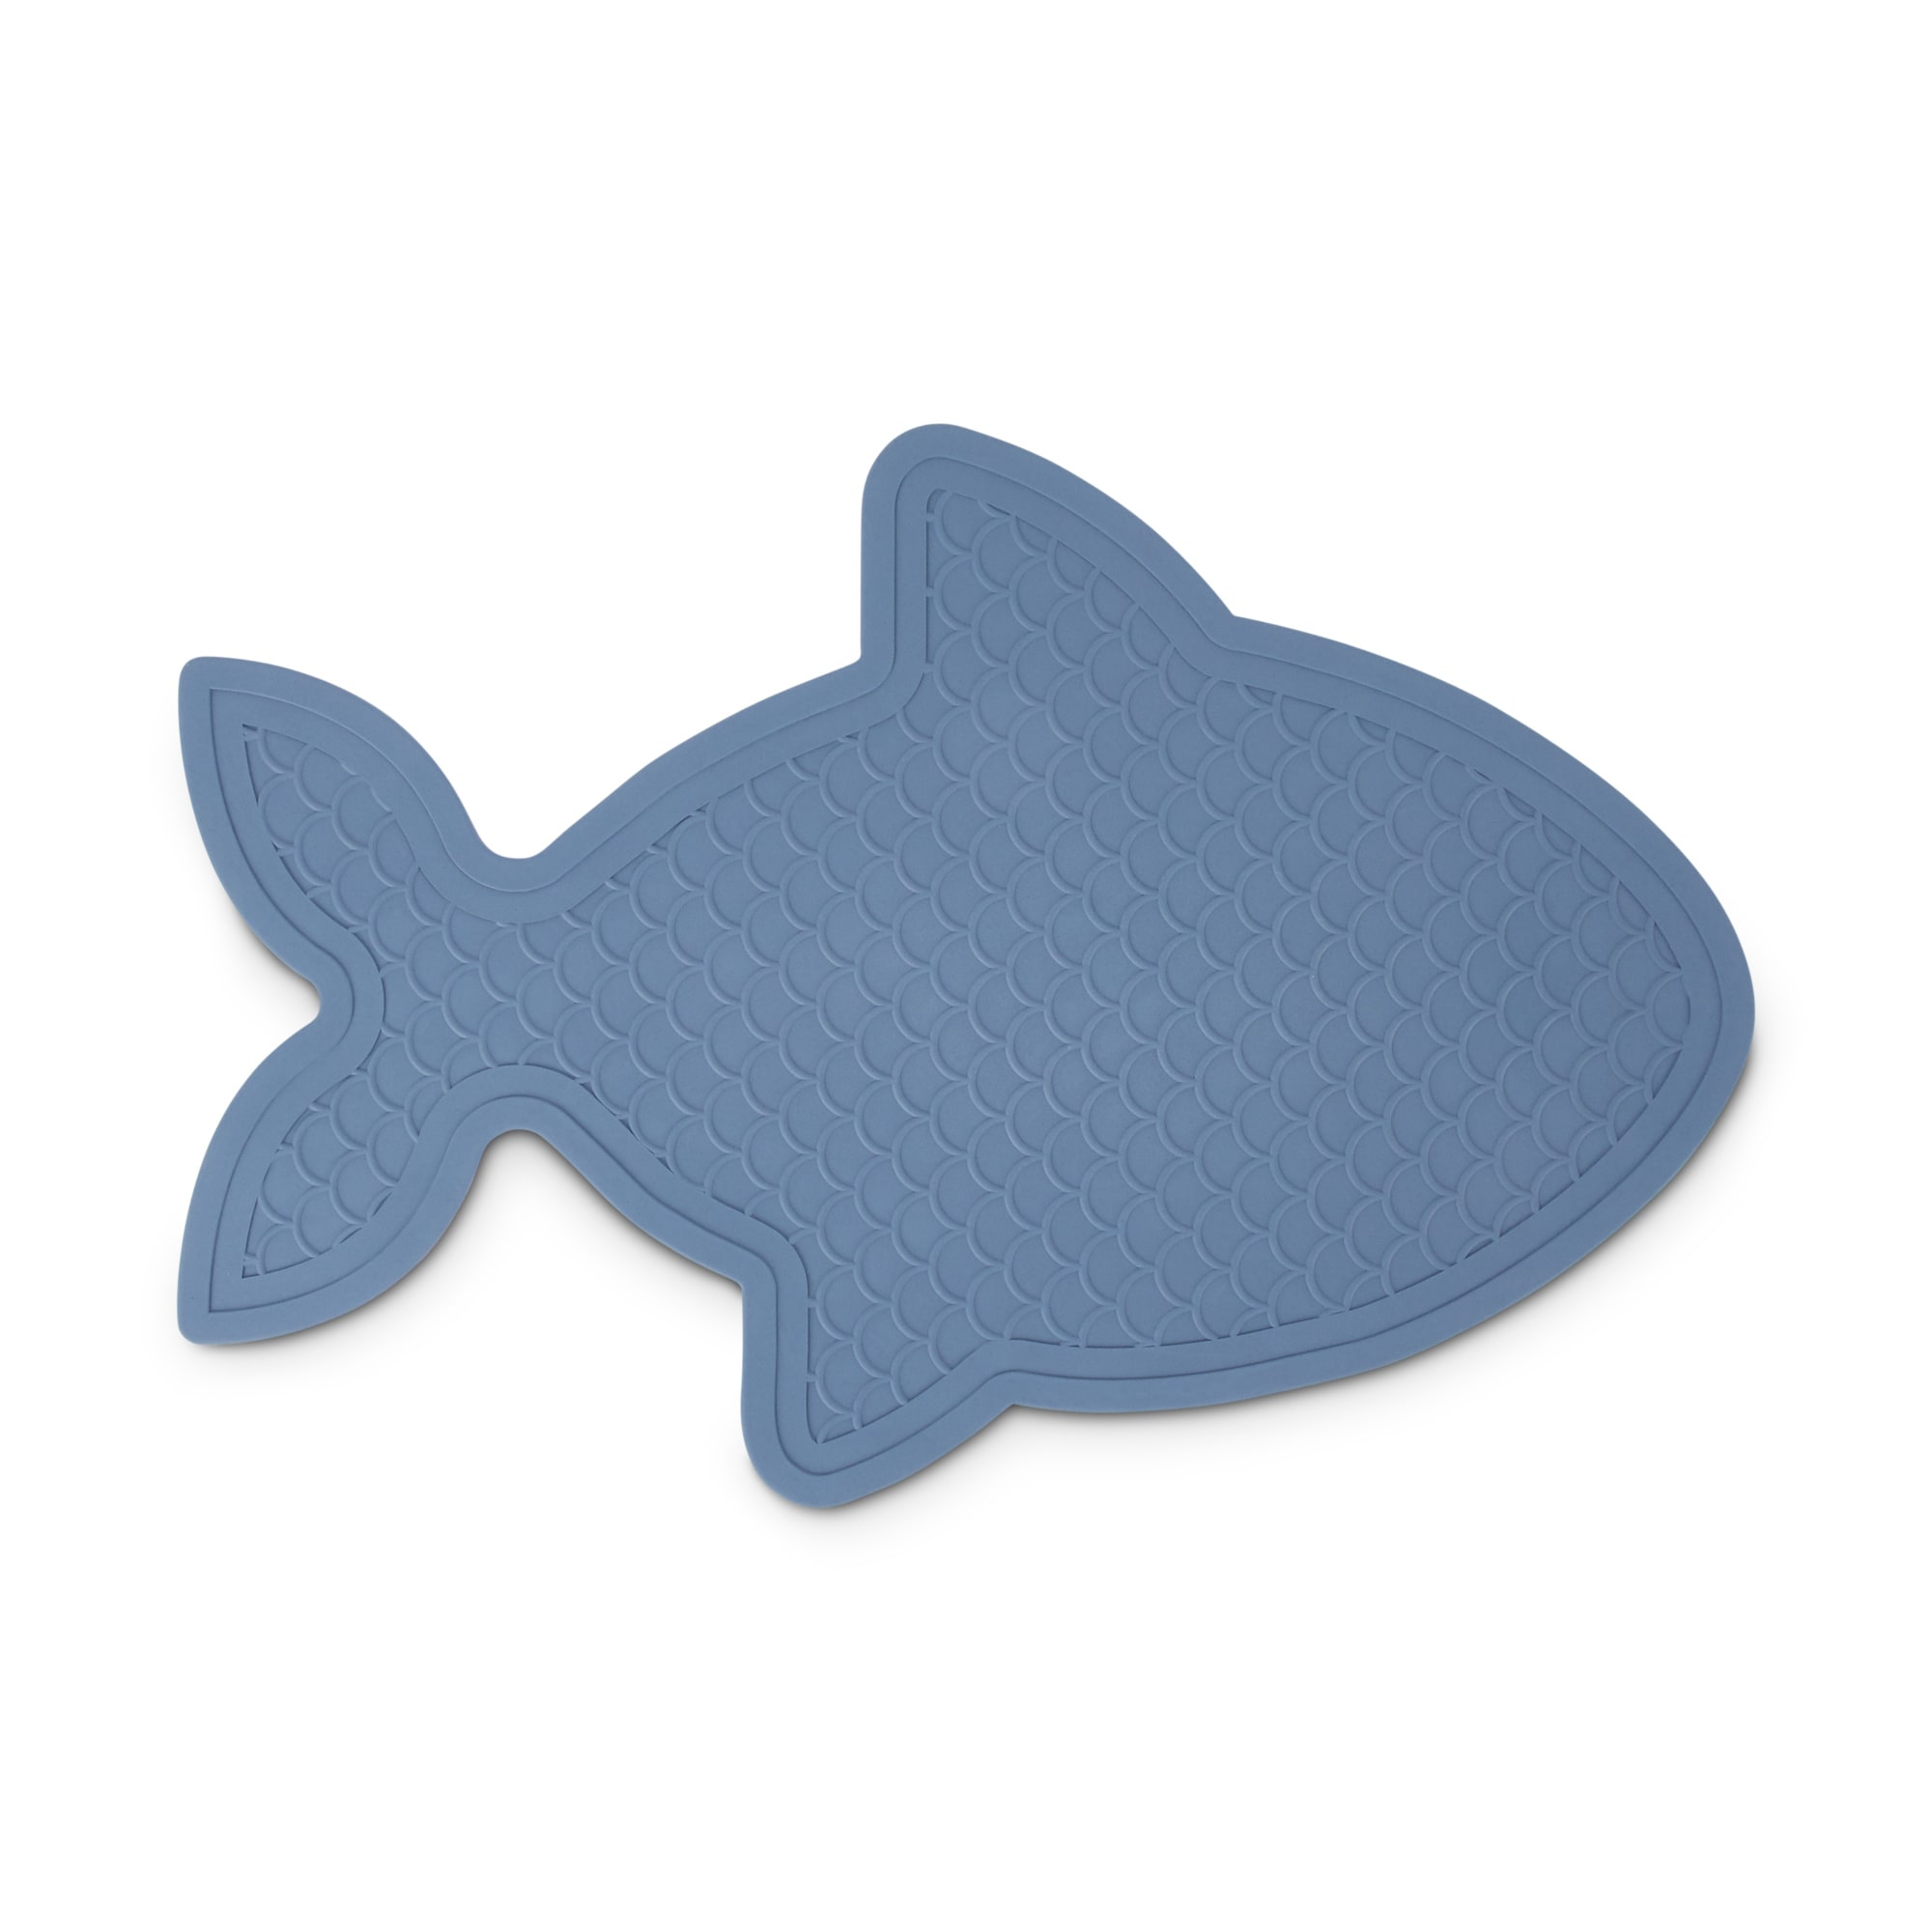 harmony-fish-shaped-rubber-blue-placemat-for-cats-20-l-x-13-75-w-petco